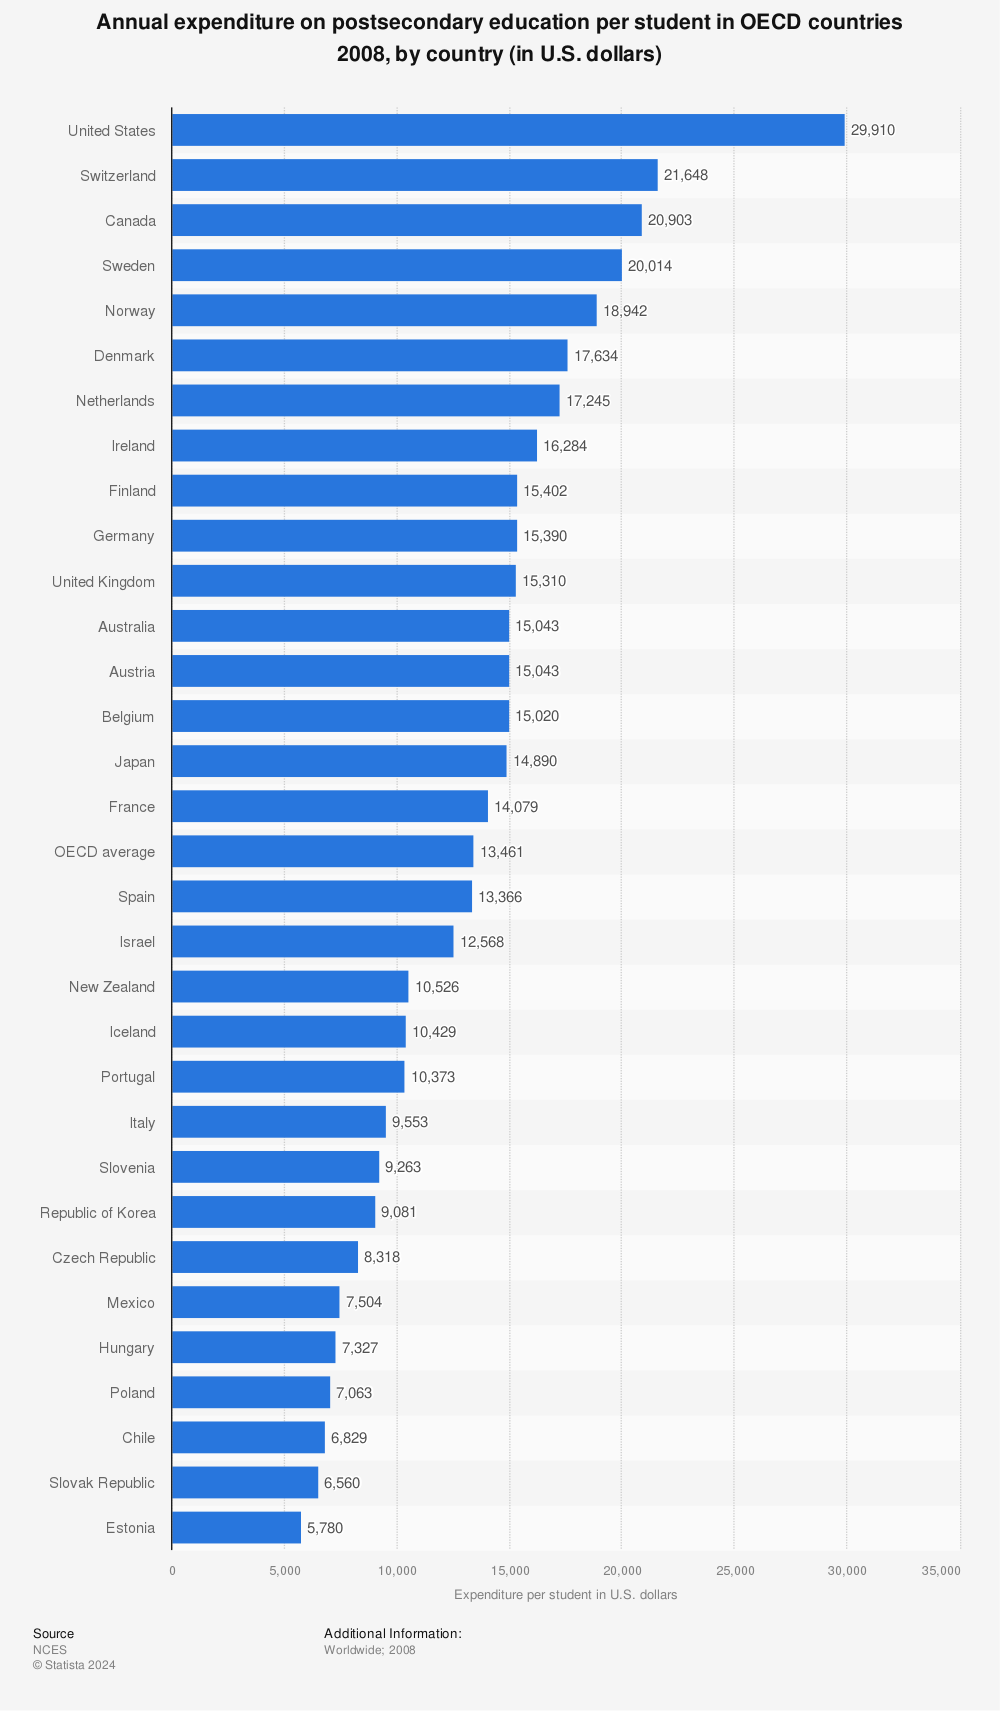 Statistic: Annual expenditure on postsecondary education per student in OECD countries 2008, by country (in U.S. dollars) | Statista